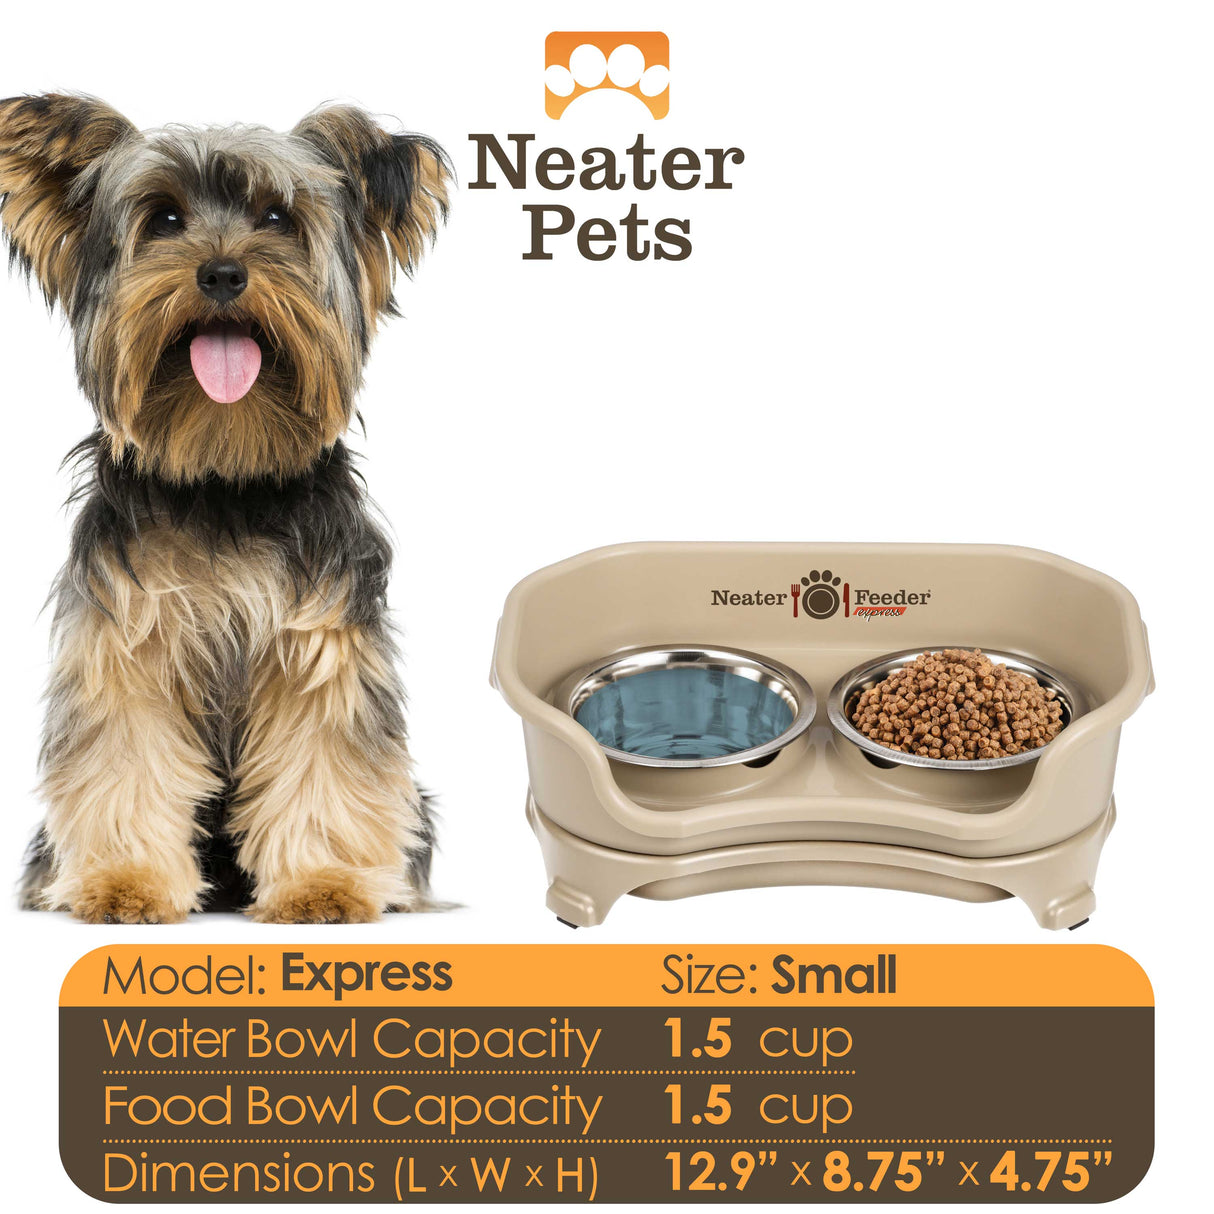 Almond Express Small Dog feeder bowl capacity and dimensions